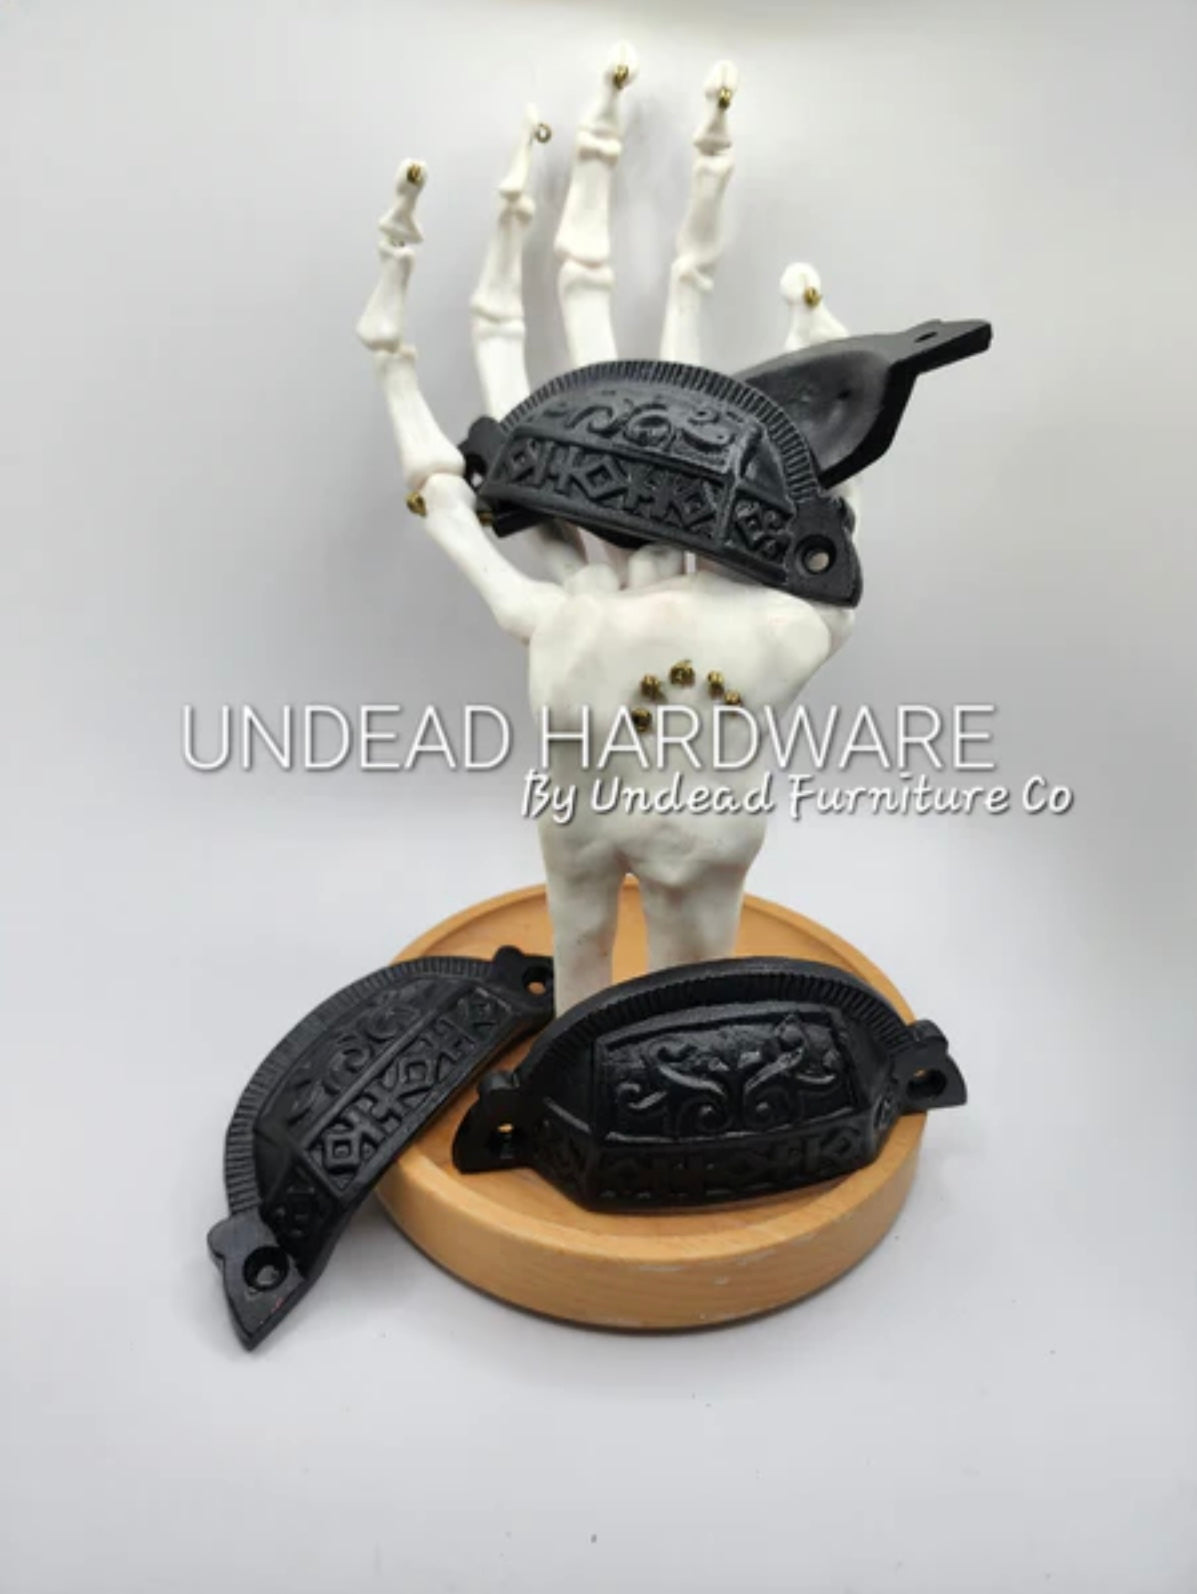 Thor Patterned Iron Cup Handles by Undead Hardware